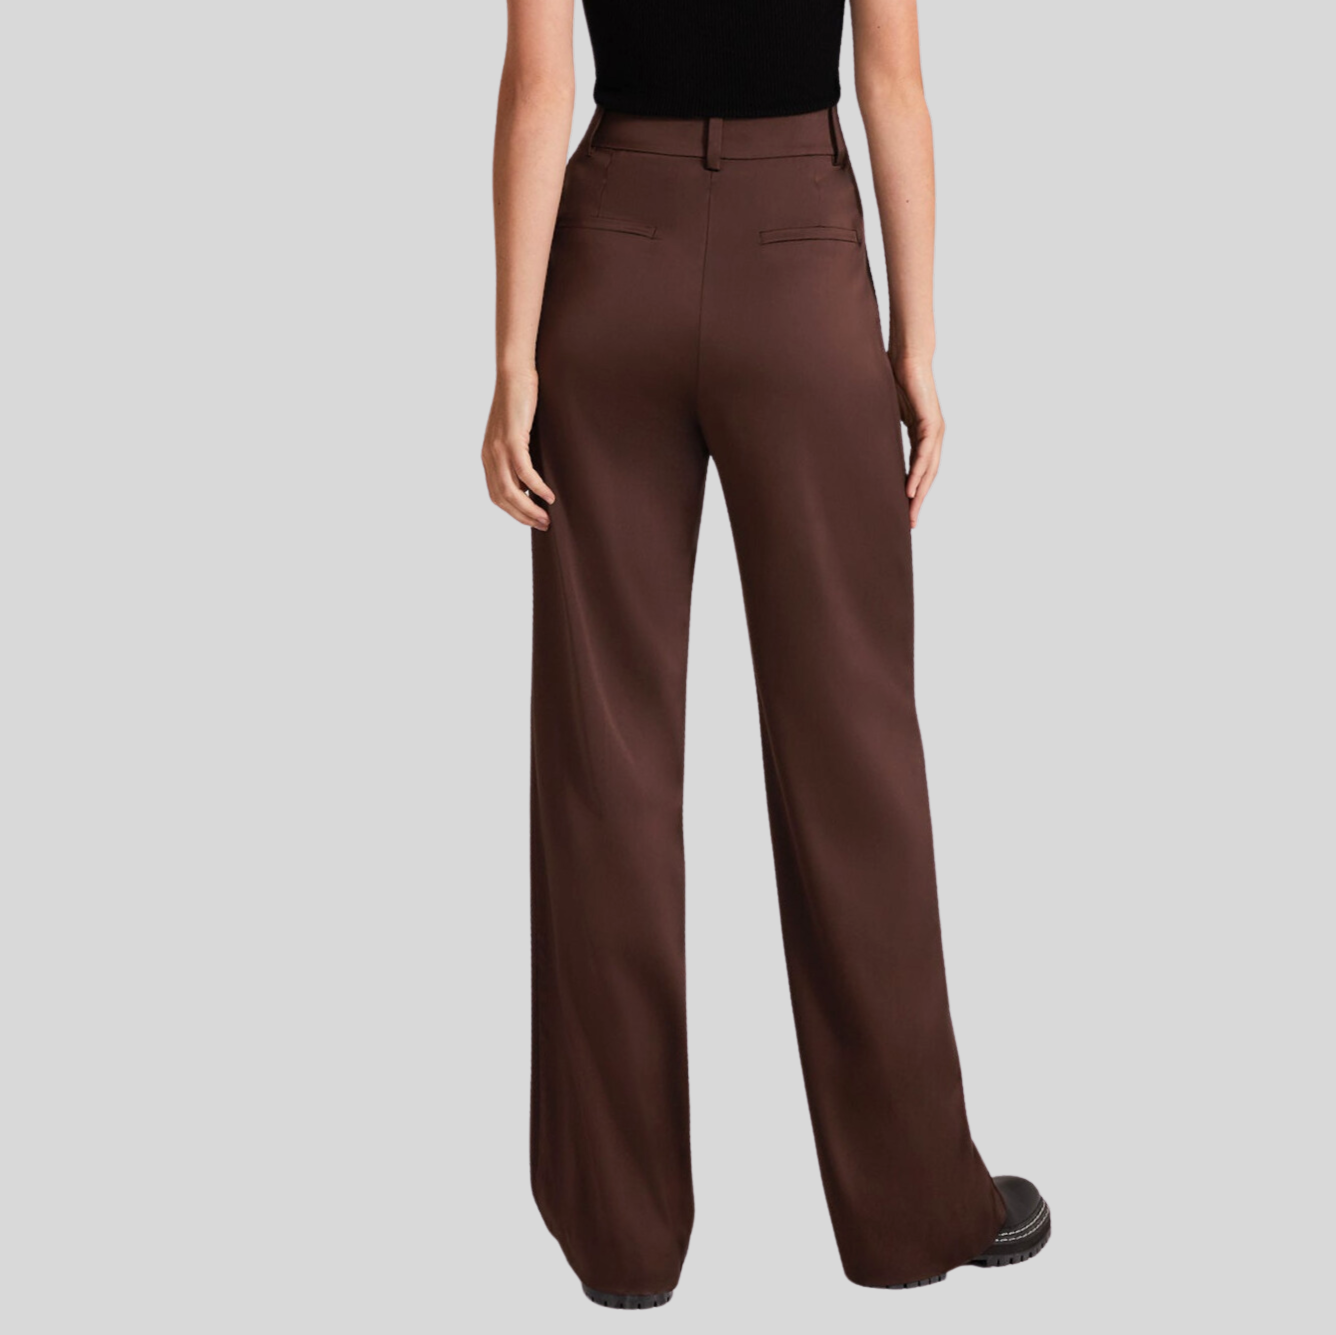 Gotstyle Fashion - Favorite Daughter Pants Satiny High Waist Wide-Leg Pleated Pant - Brown